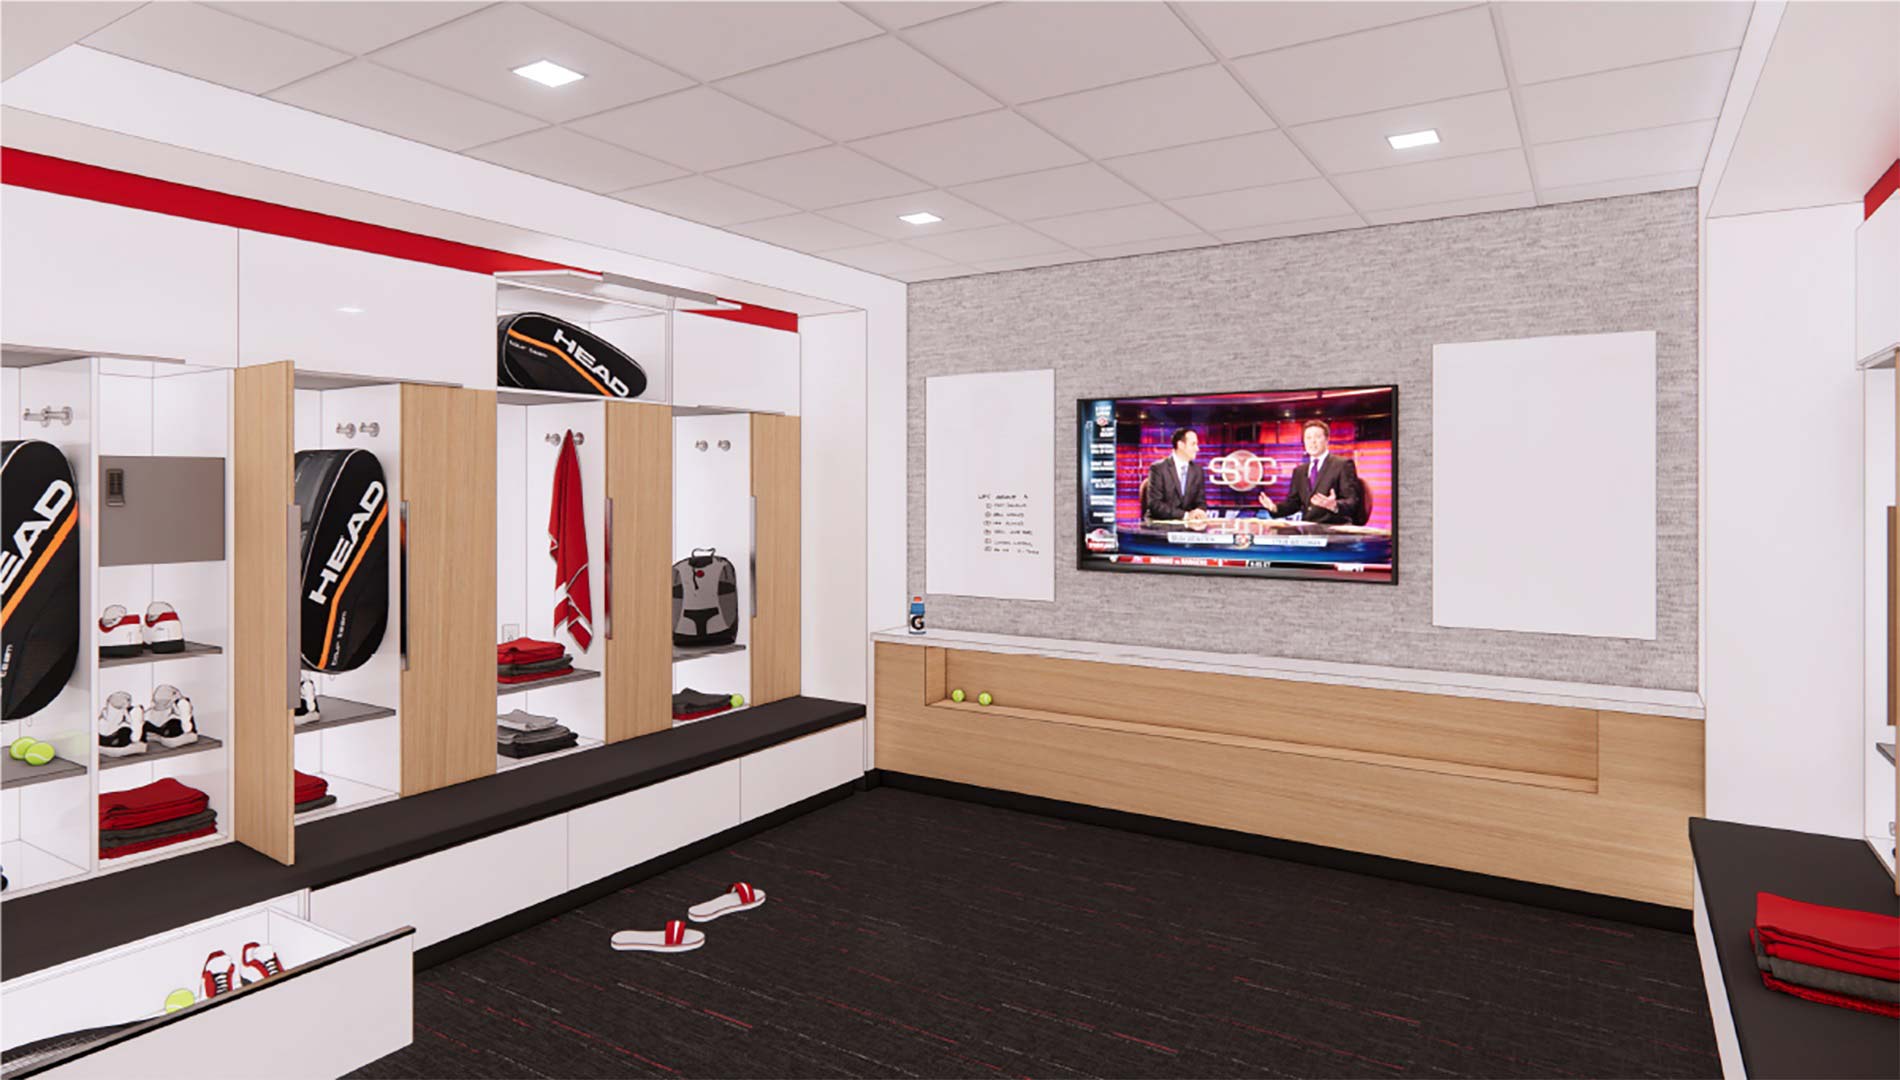 A rendering of a locker / changing area for tennis, with individual locker areas with wood doors for each locker, carpet on the floor, red accents on the walls, and large TV on one of the wall.